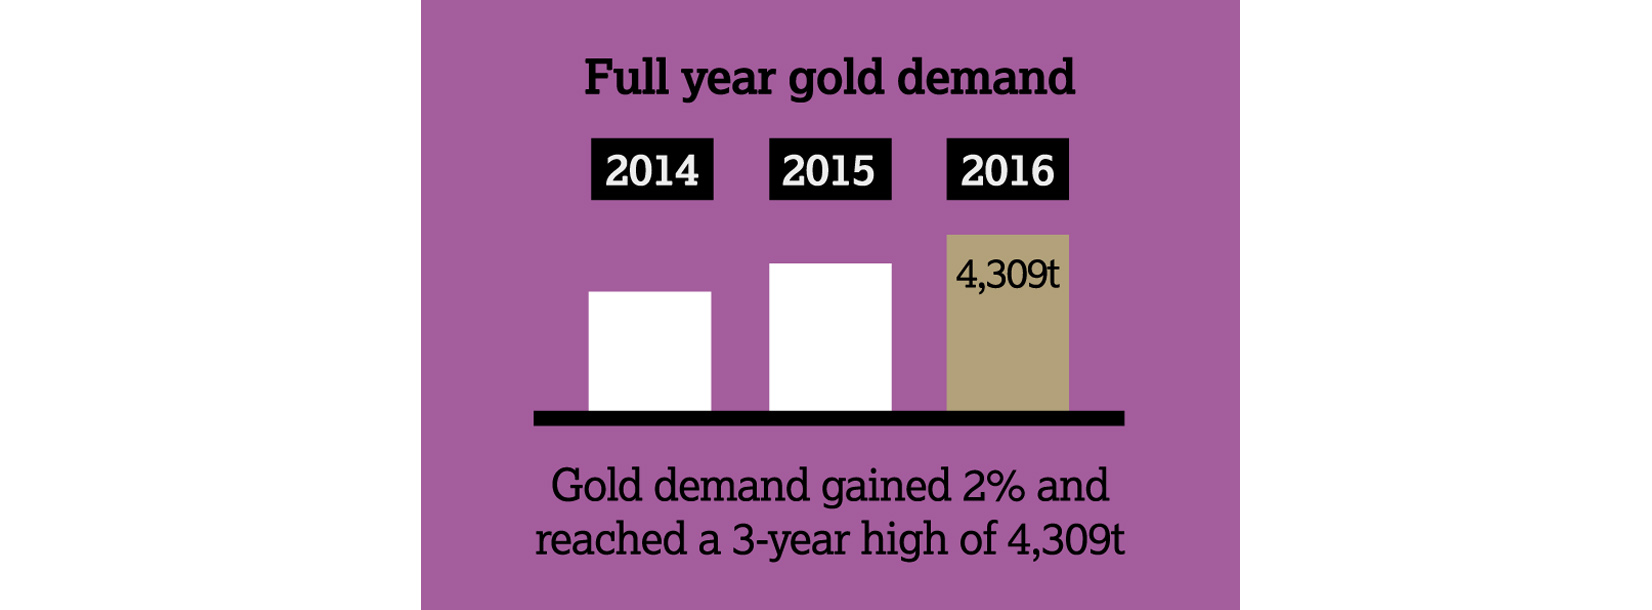 Gold Demand Trends Full Year 2016